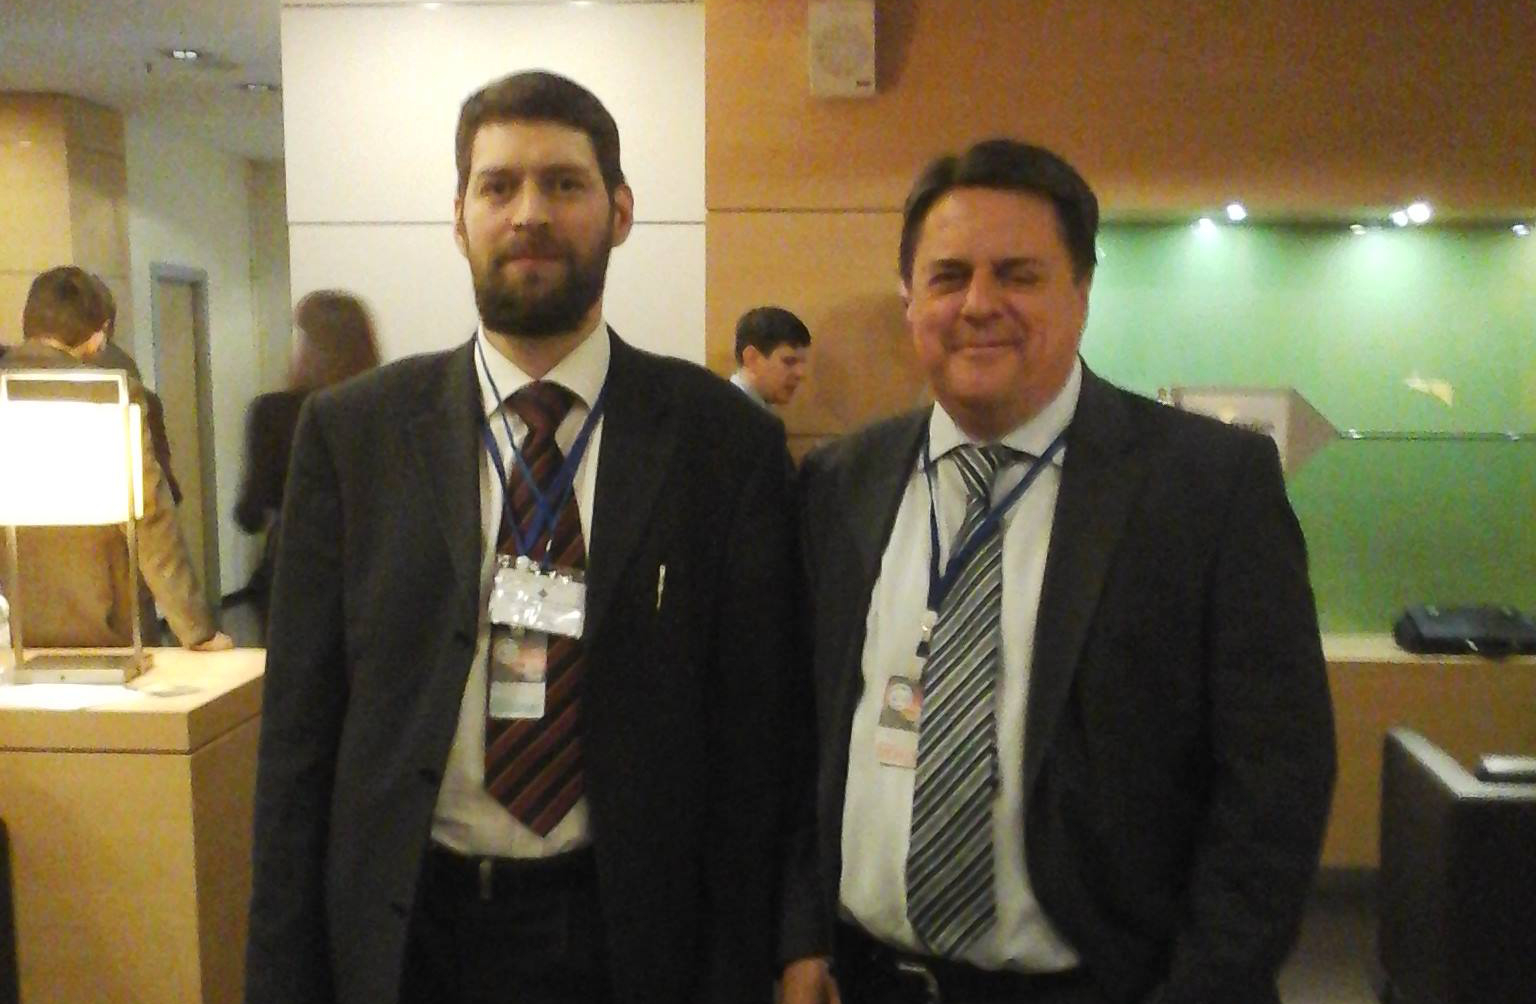 (left to right) Nikolay Trushchalov, a leading member of the Russian Imperial Movement, and Nick Griffin, ex-leader of the fascist British National Party, St. Petersburg, Russia, 22 March 2015